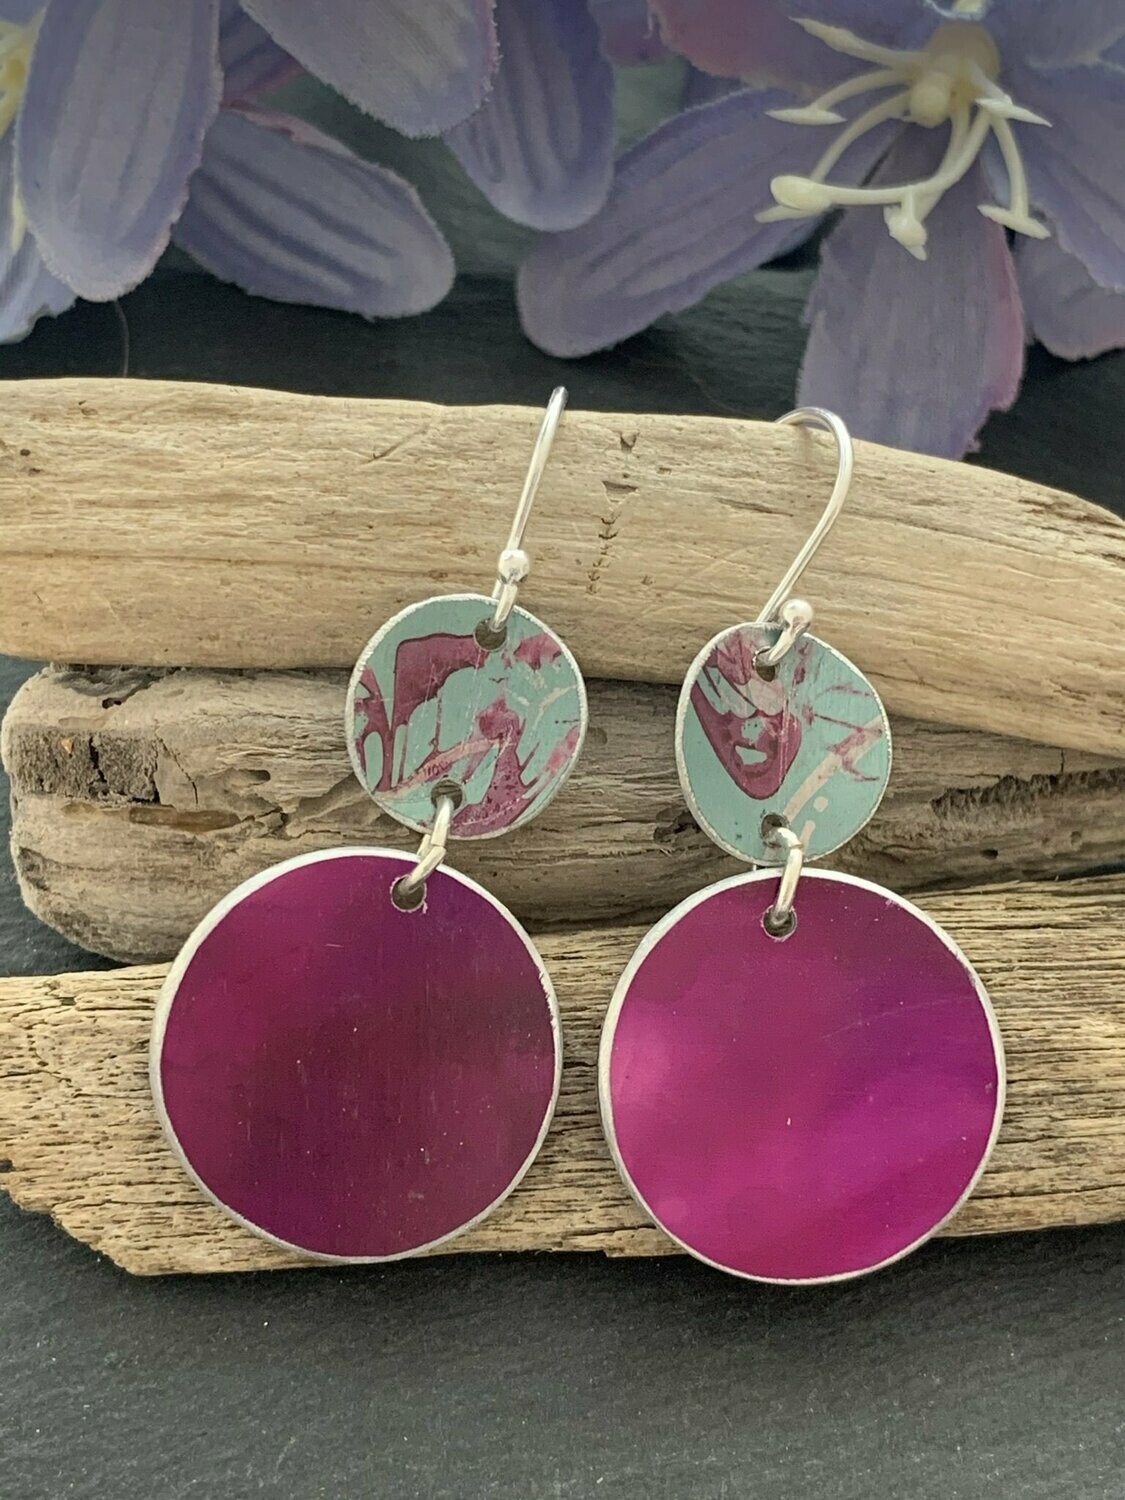 Printed Aluminium and sterling silver drop earrings - duck egg blue and cerise pink